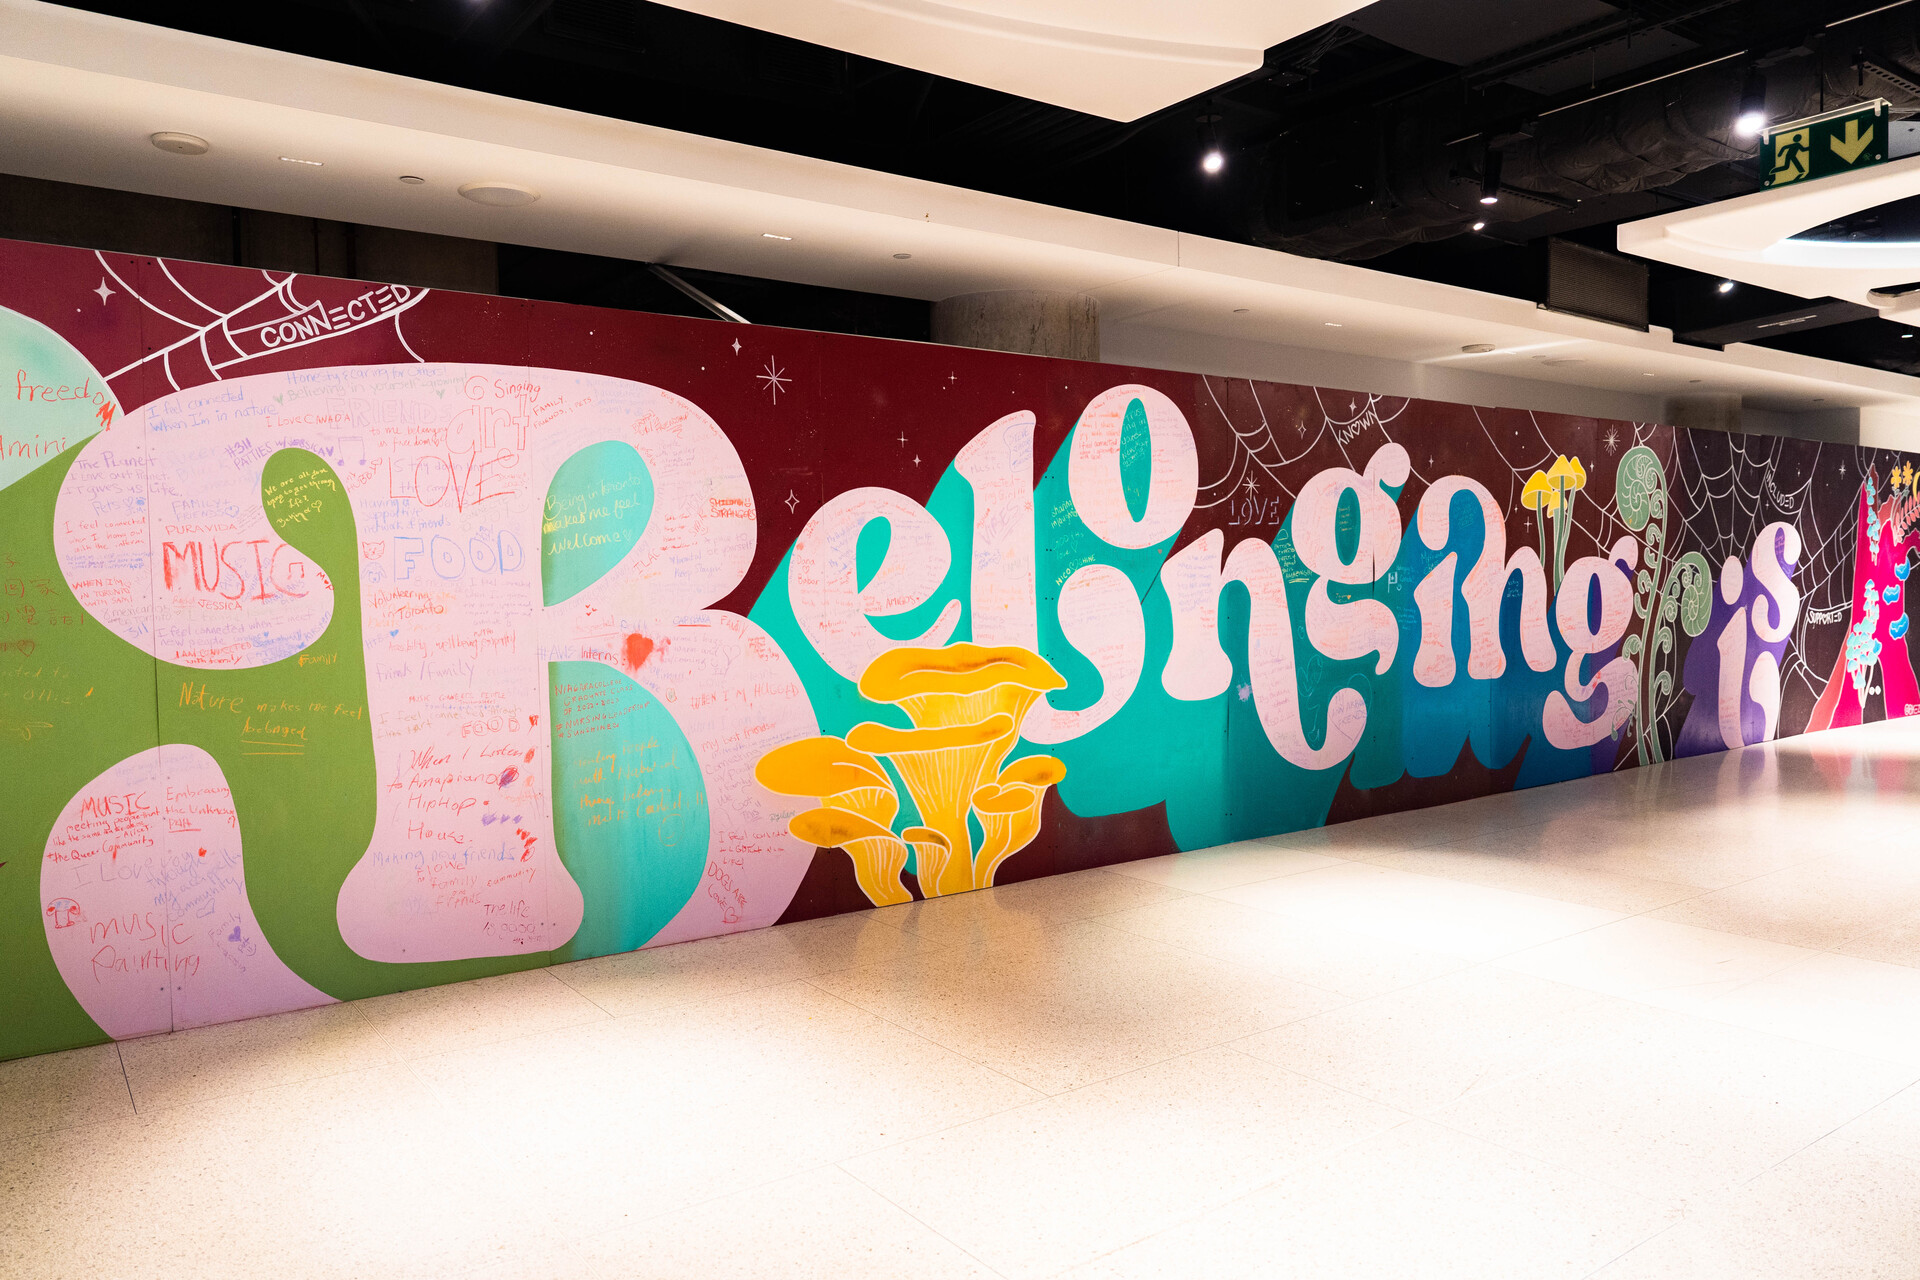 Photo of Belonging Is at the Union Station Foodie Aisle by Cassandra Popescu. The words Belonging Is is in big curly white font on a long wall. Embellished with colourful mushrooms and cobwebs. A lot of space is filled with written entries from passerbys.